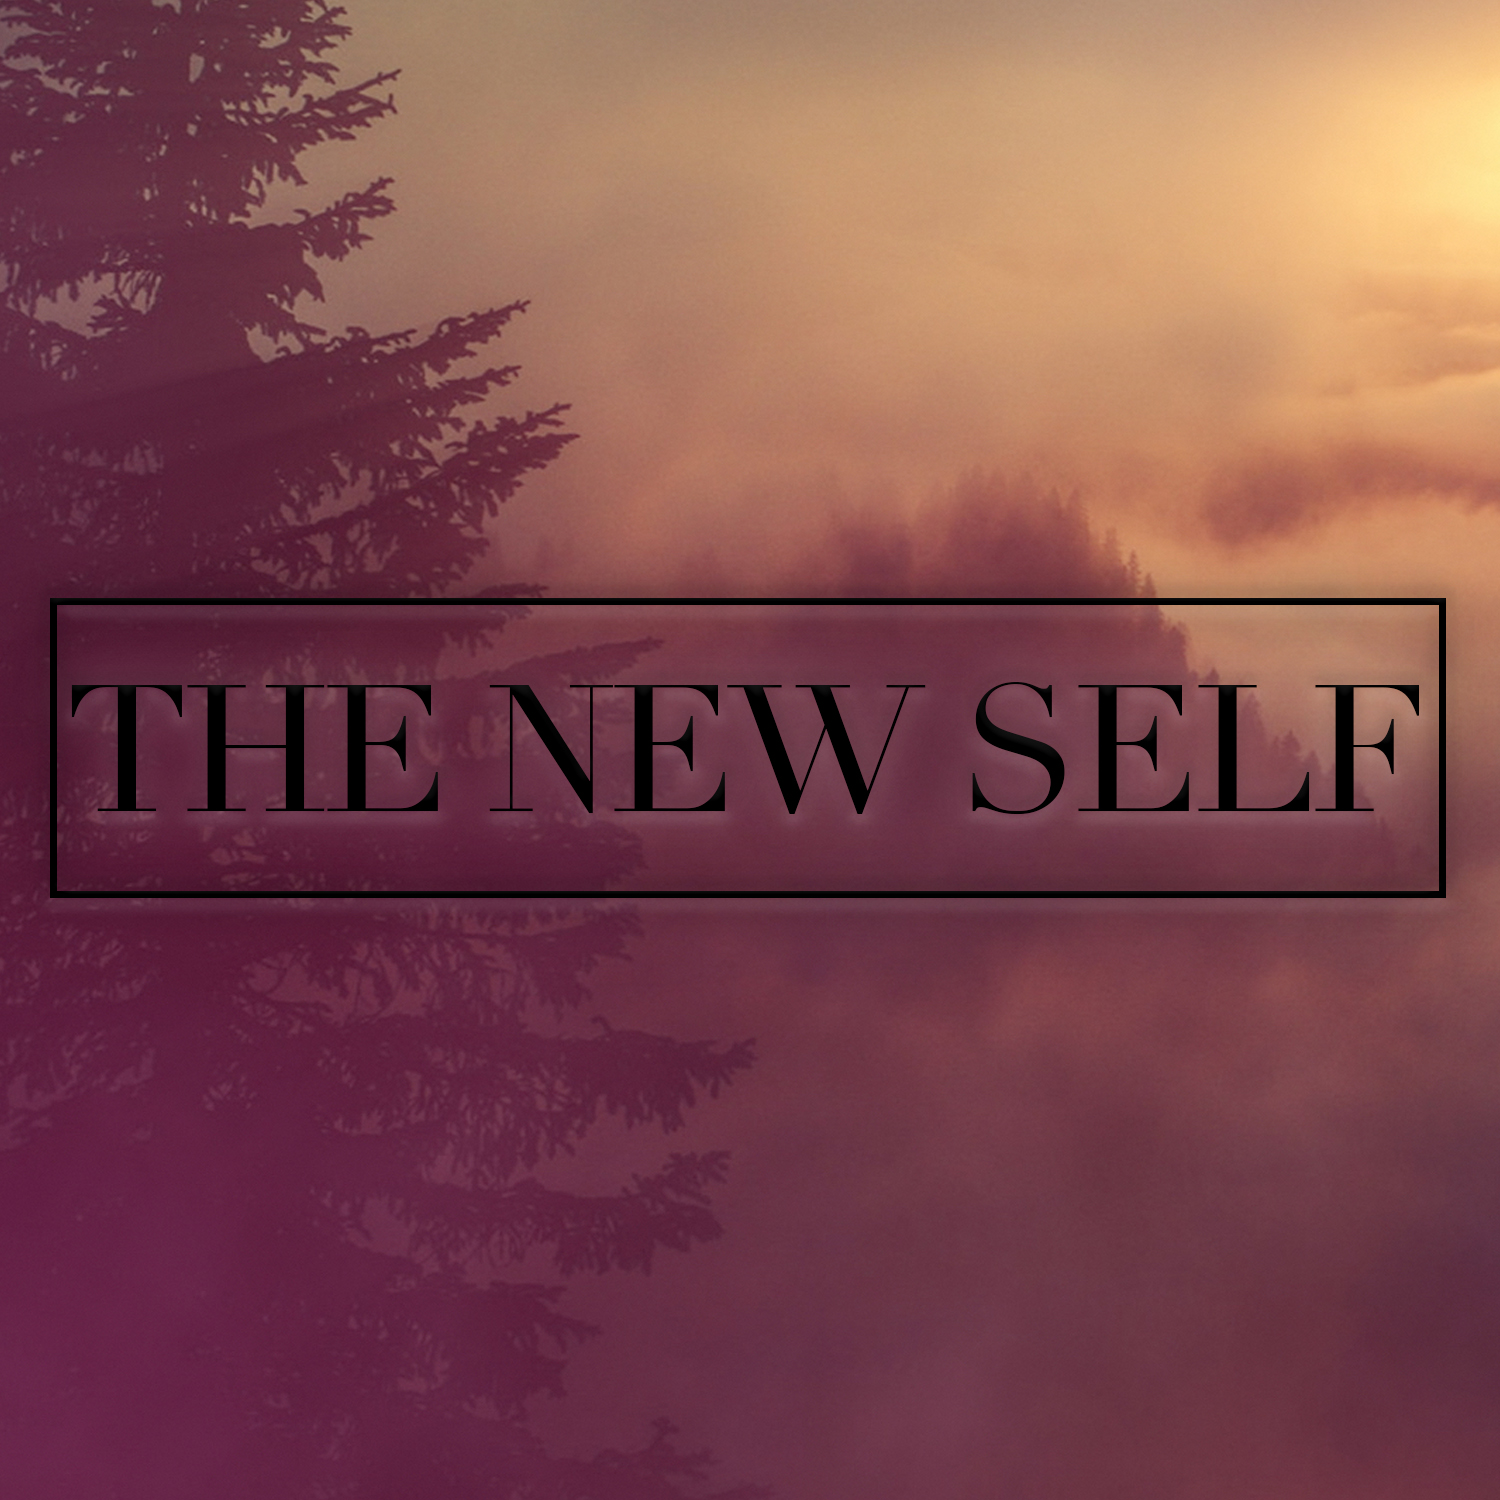 The New Self